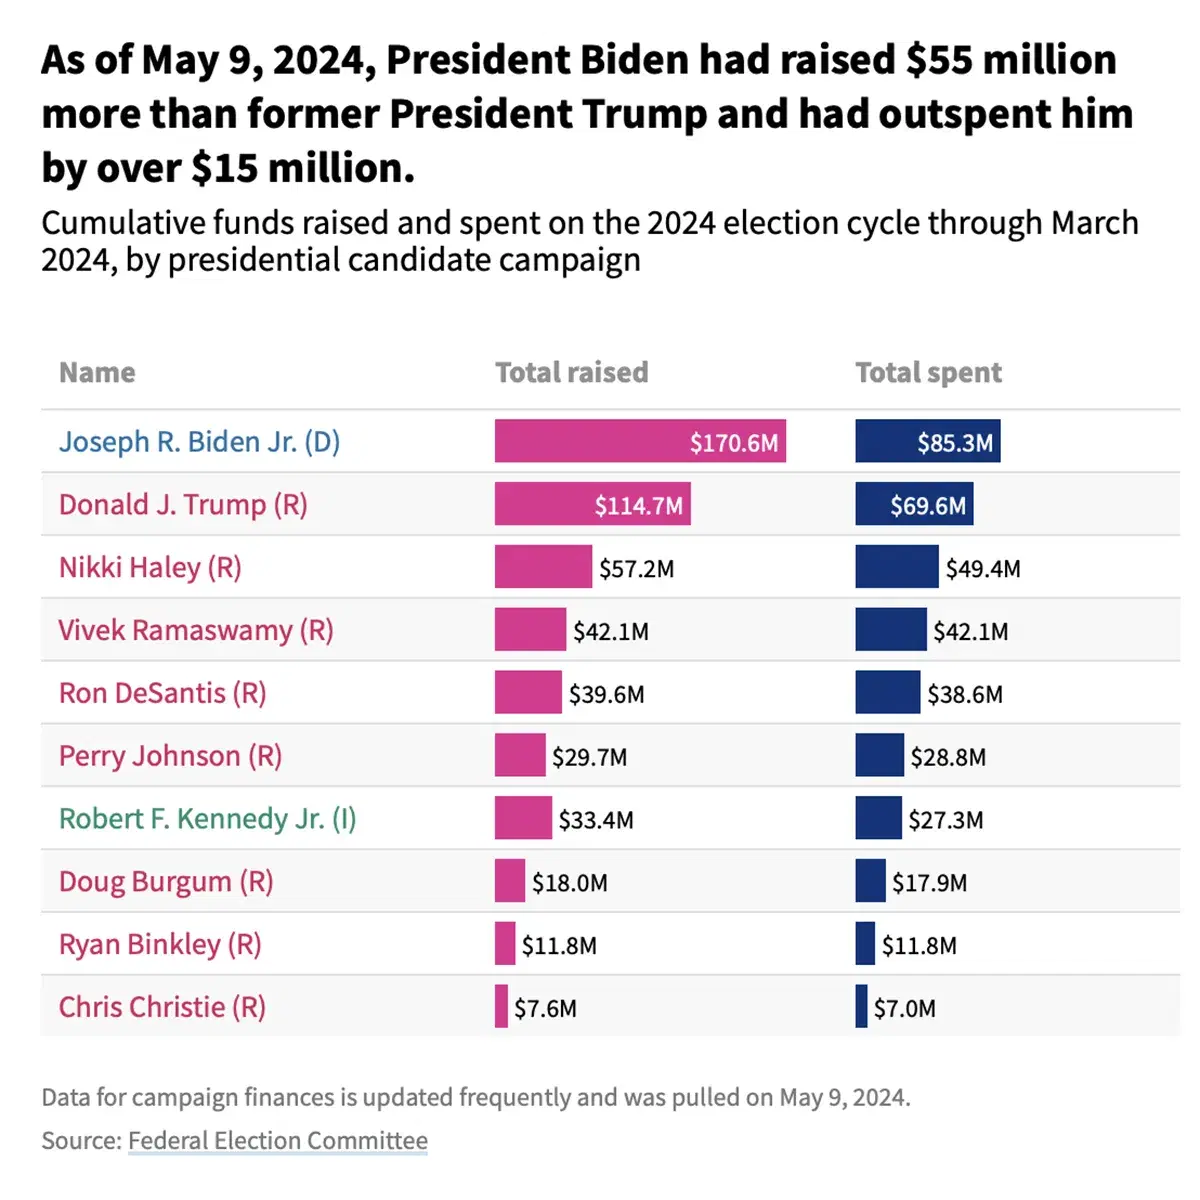 Tracking Funds Raised and Spent on the 2024 US Election Cycle